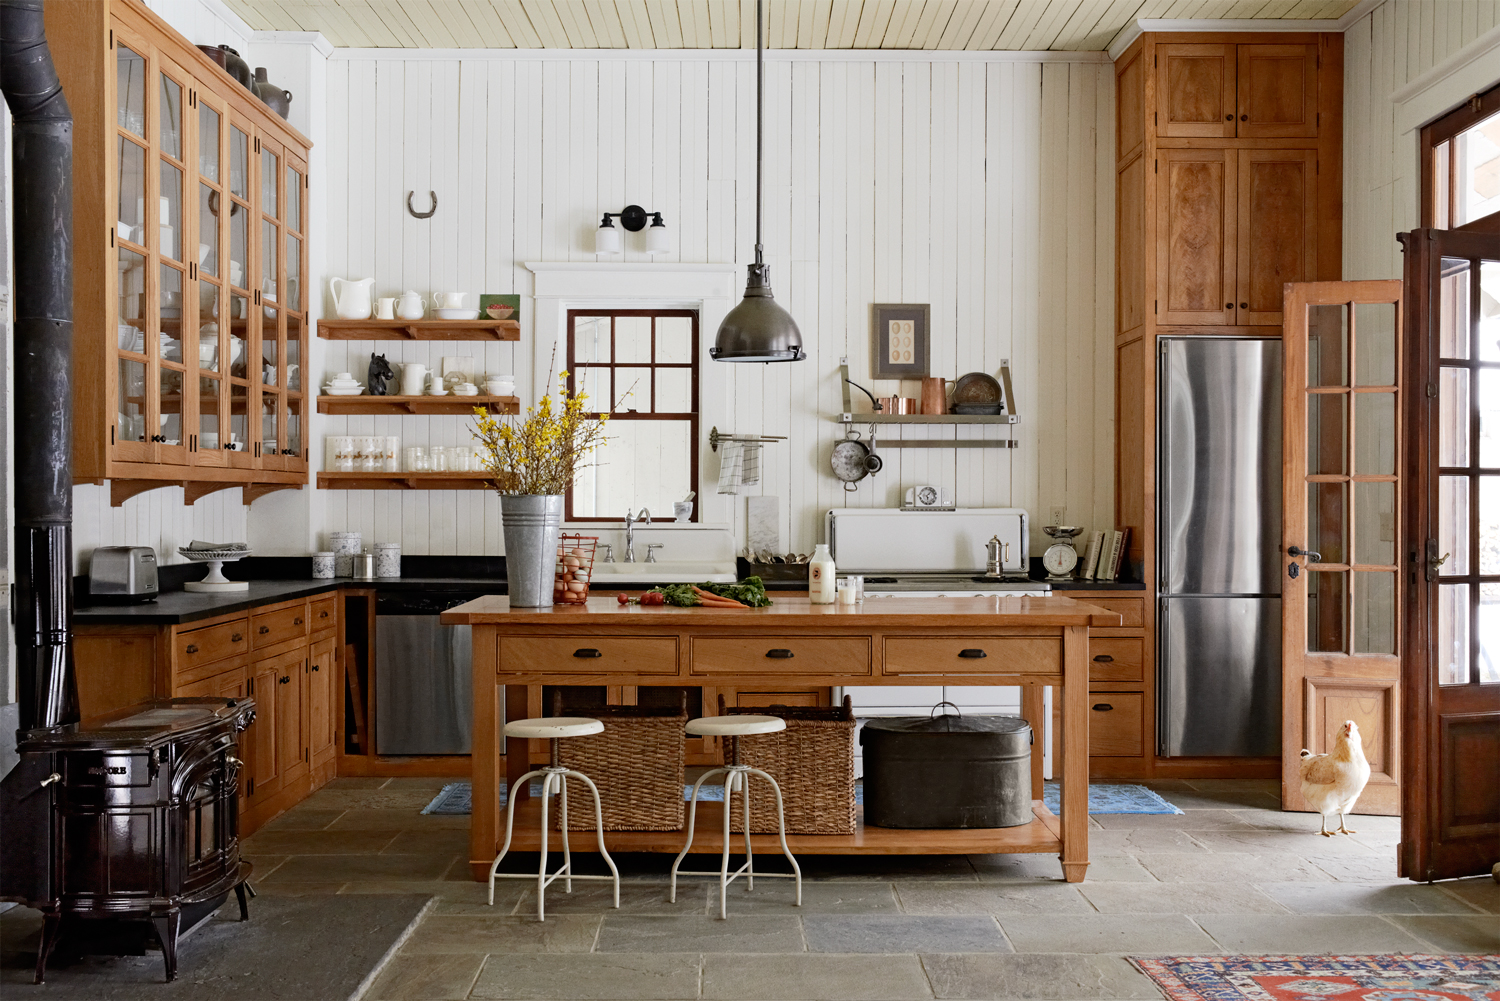 Country Style Kitchen